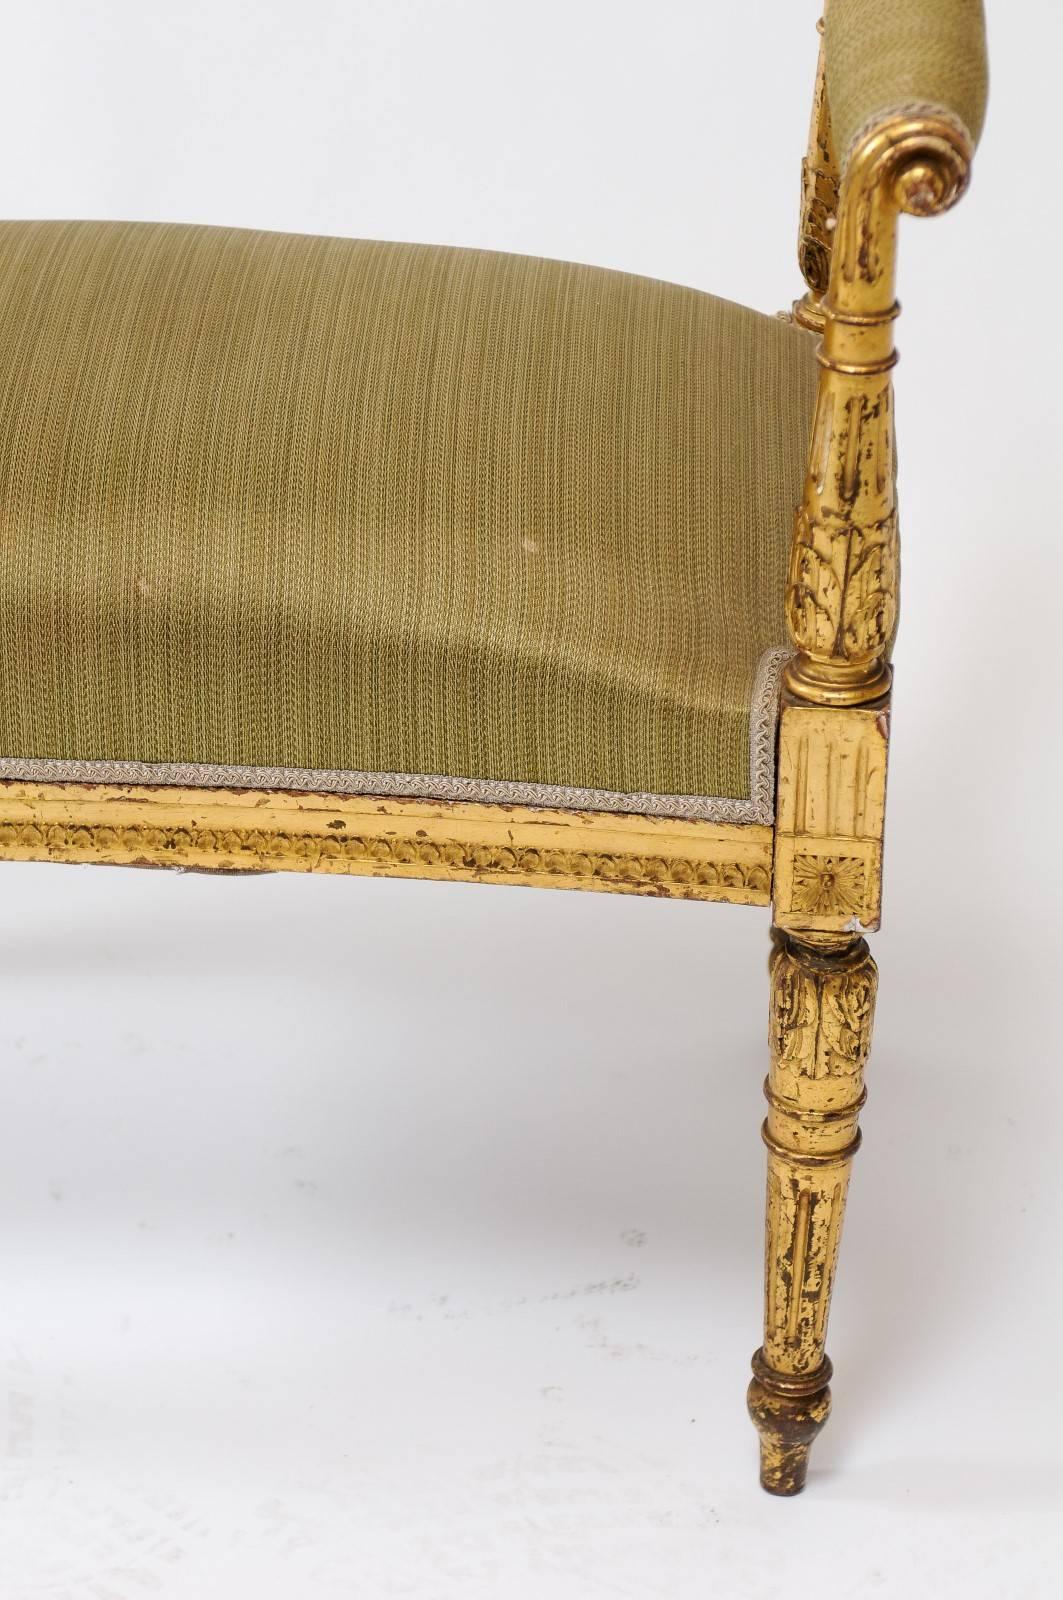 Upholstery French Giltwood Louis XVI Style Upholstered Bench with Out-Scrolled Arms